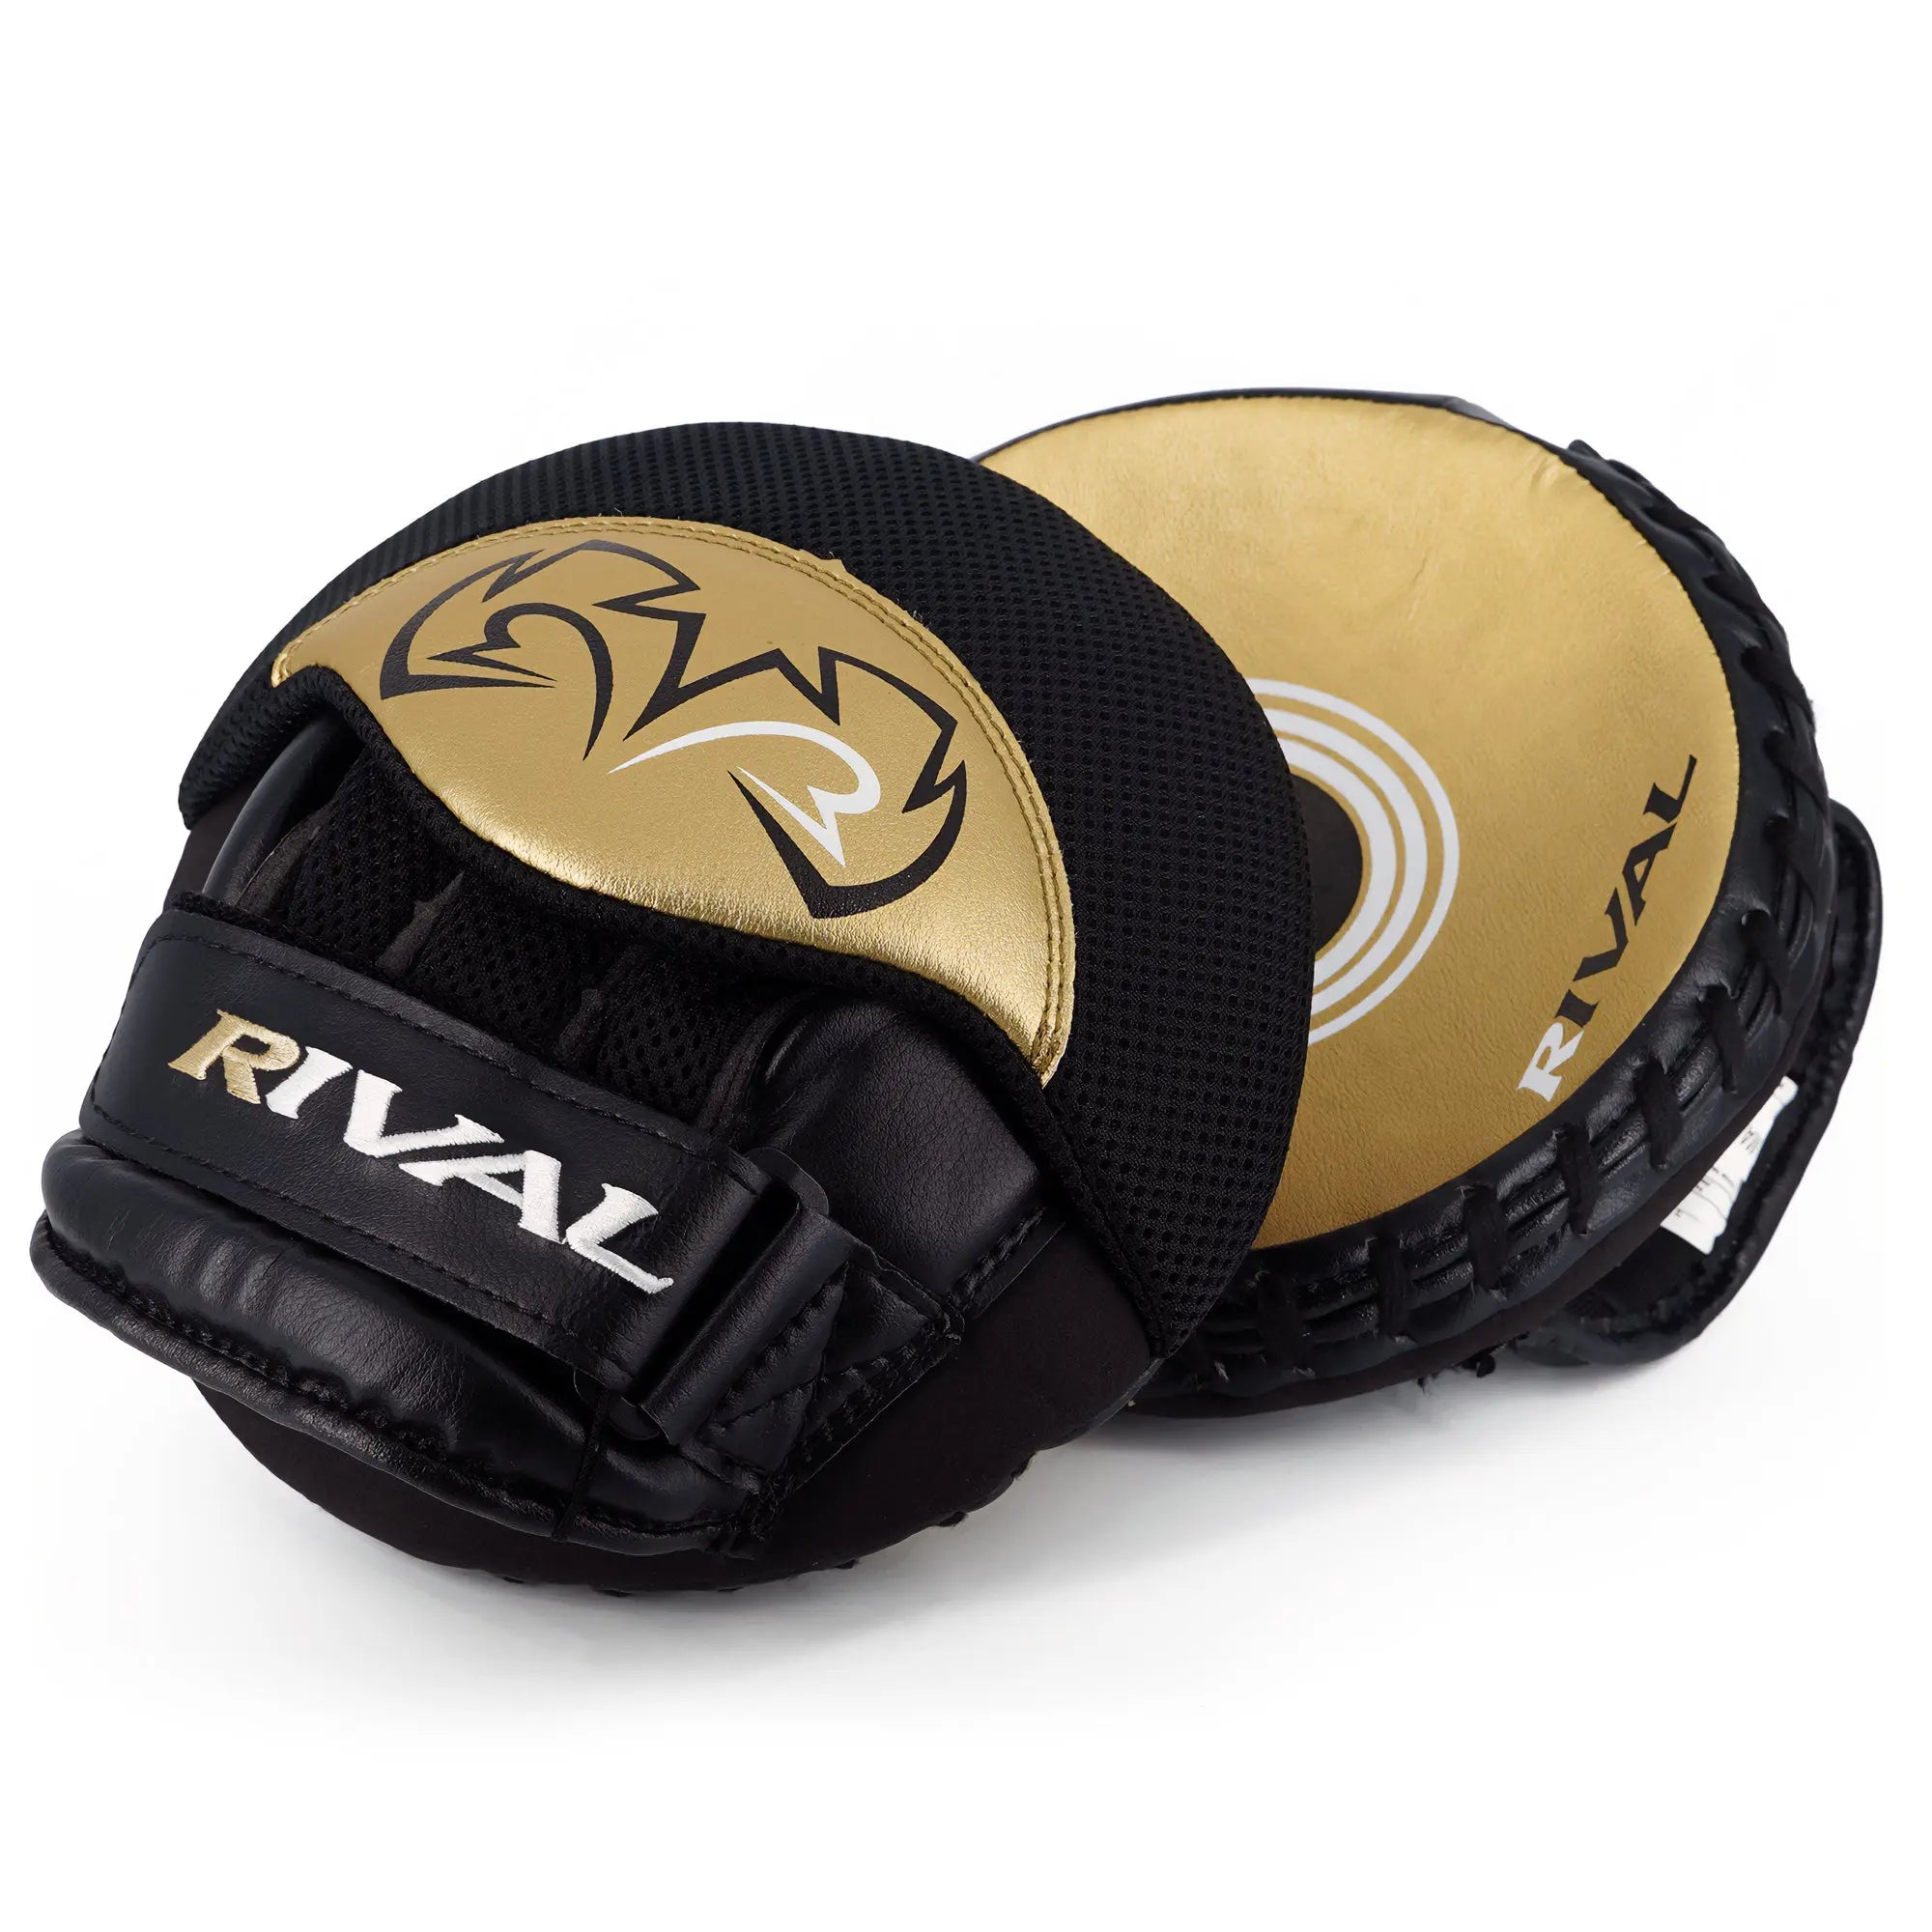 RIVAL Boxing RPM5 2.0 Parabolic Punch Mitts RIVAL